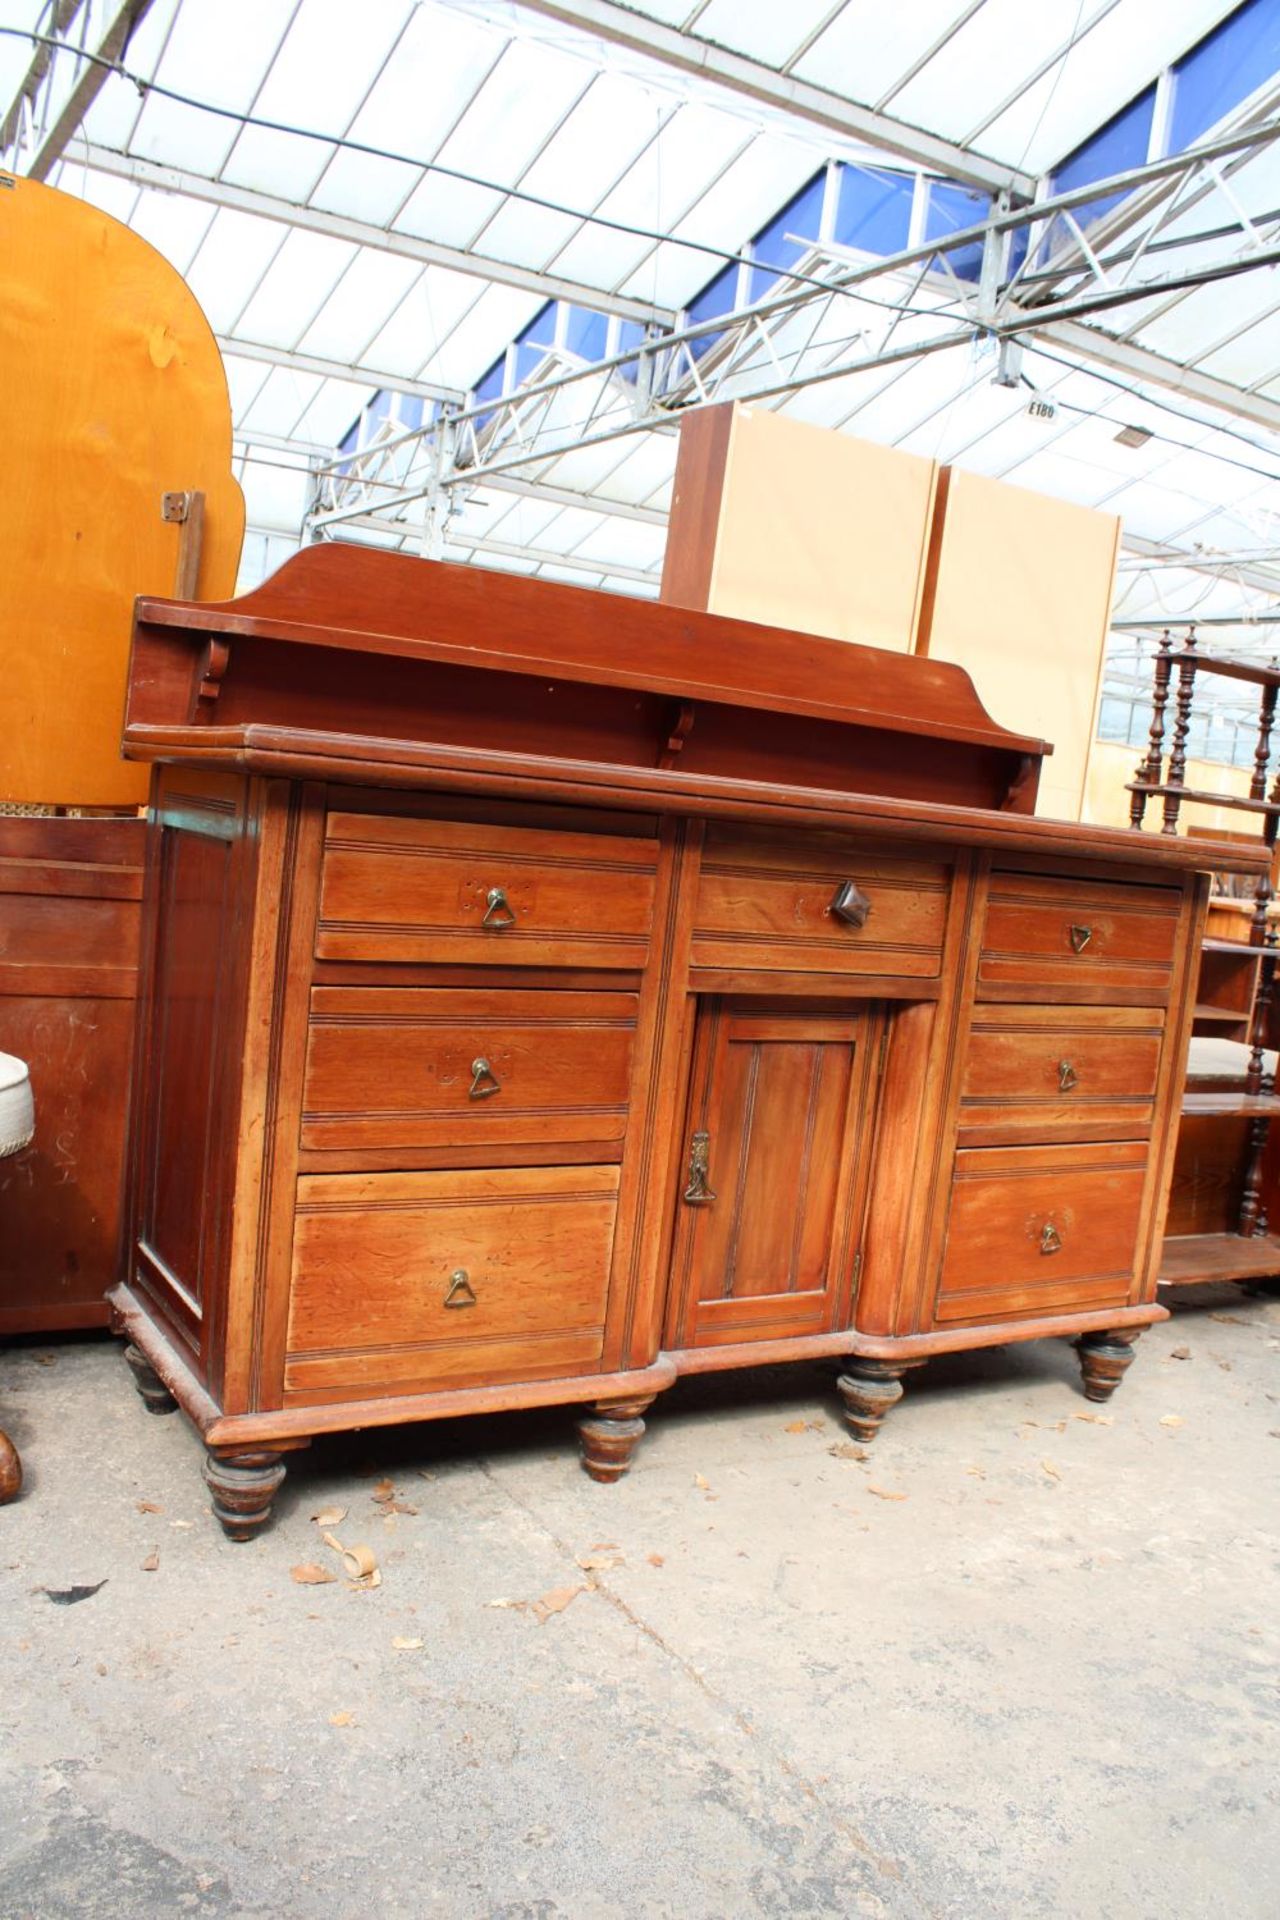 A LATE VICTORIAN MAHOGANY SIDEBOARD WITH RAISED BACK 60" WIDE - Image 2 of 3